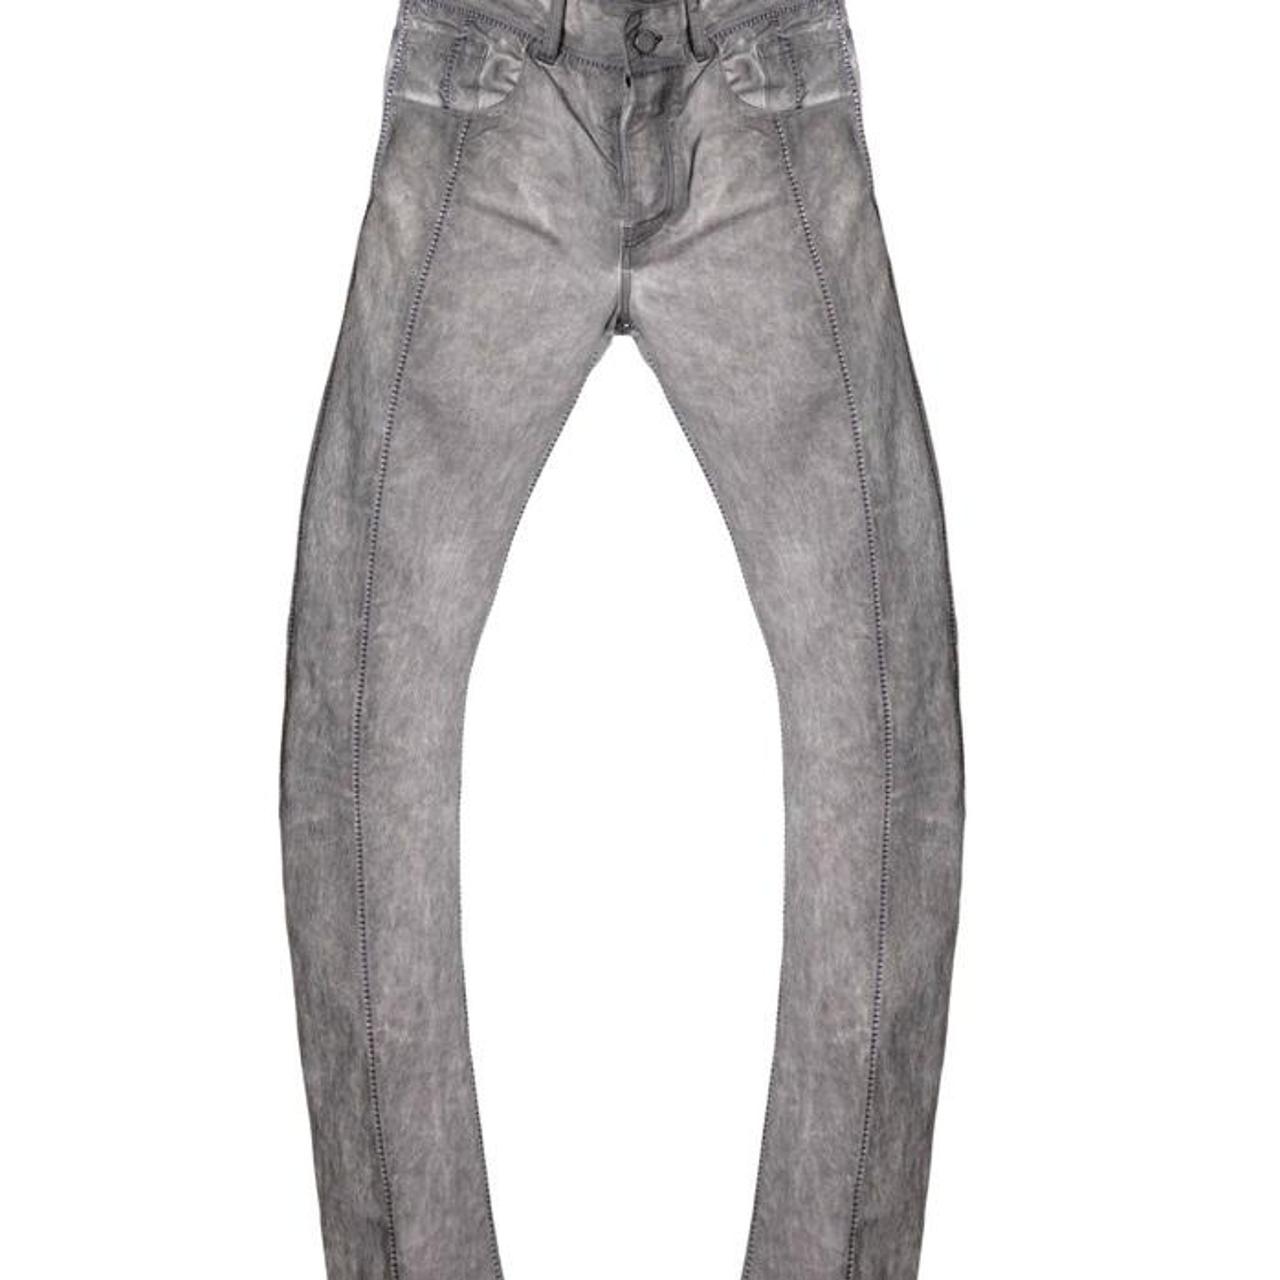 Carol Christian Poell Men's Grey and Black Jeans (3)